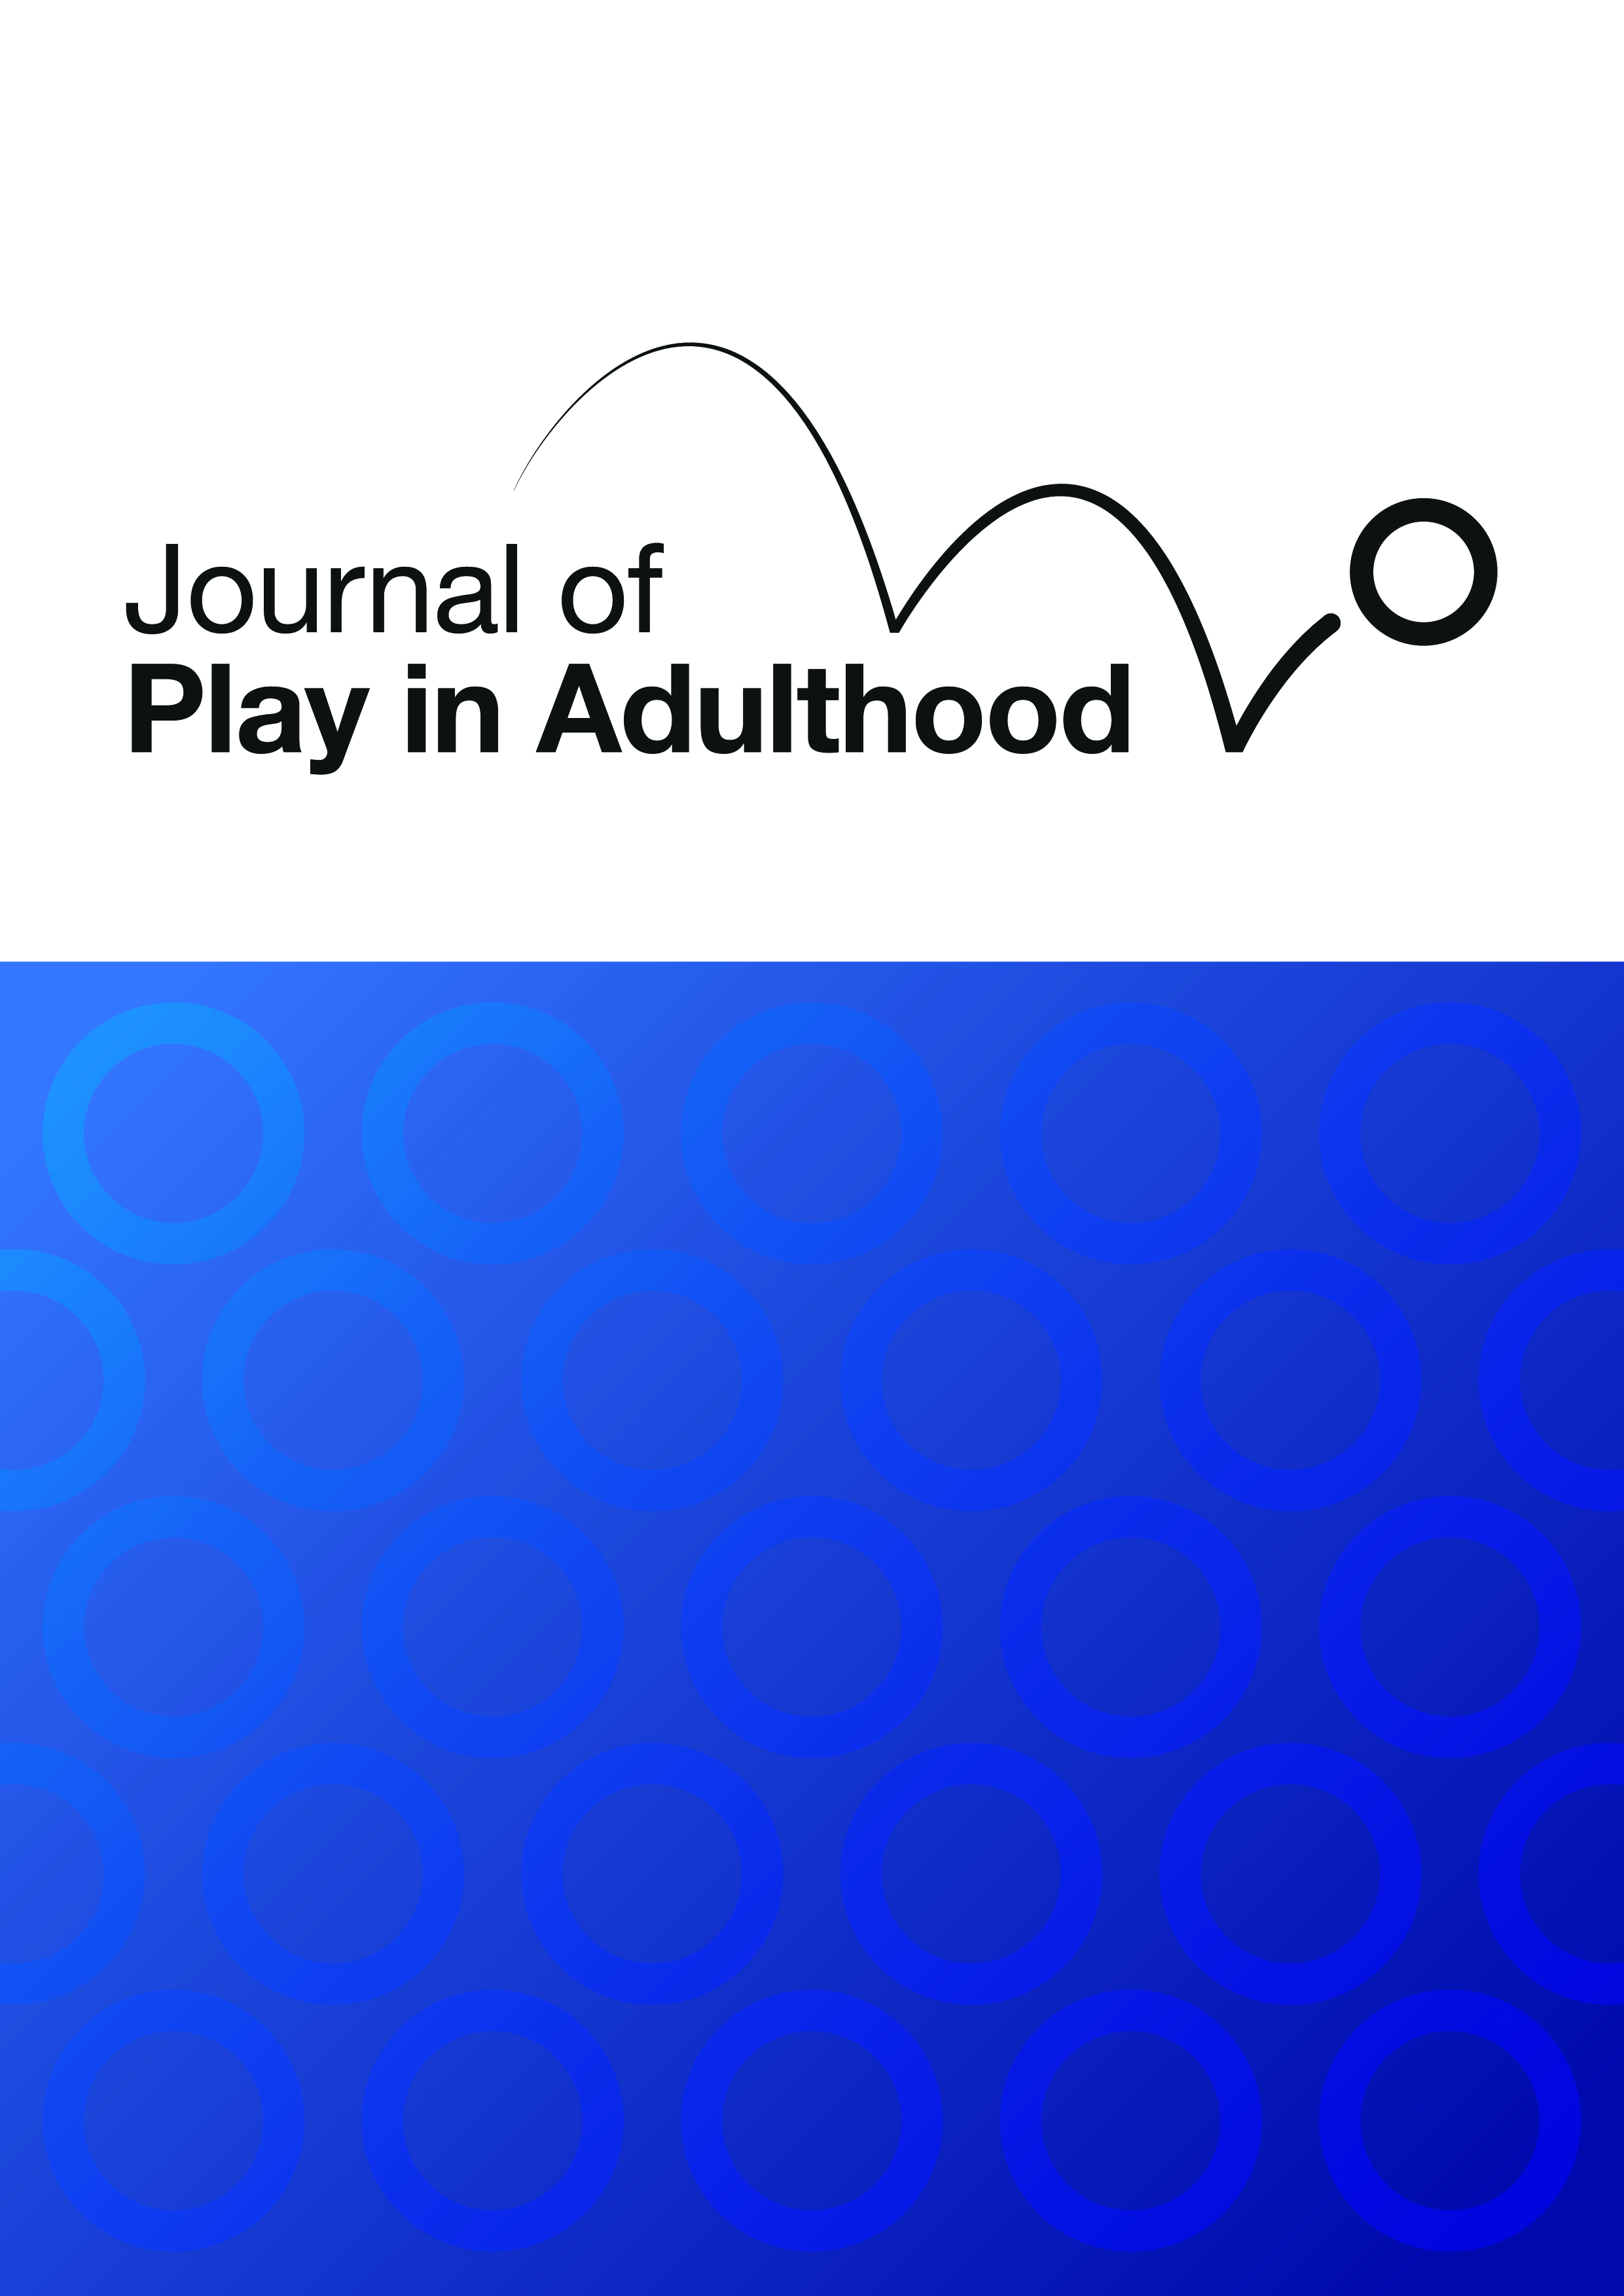 Journal of Play in Adulthood